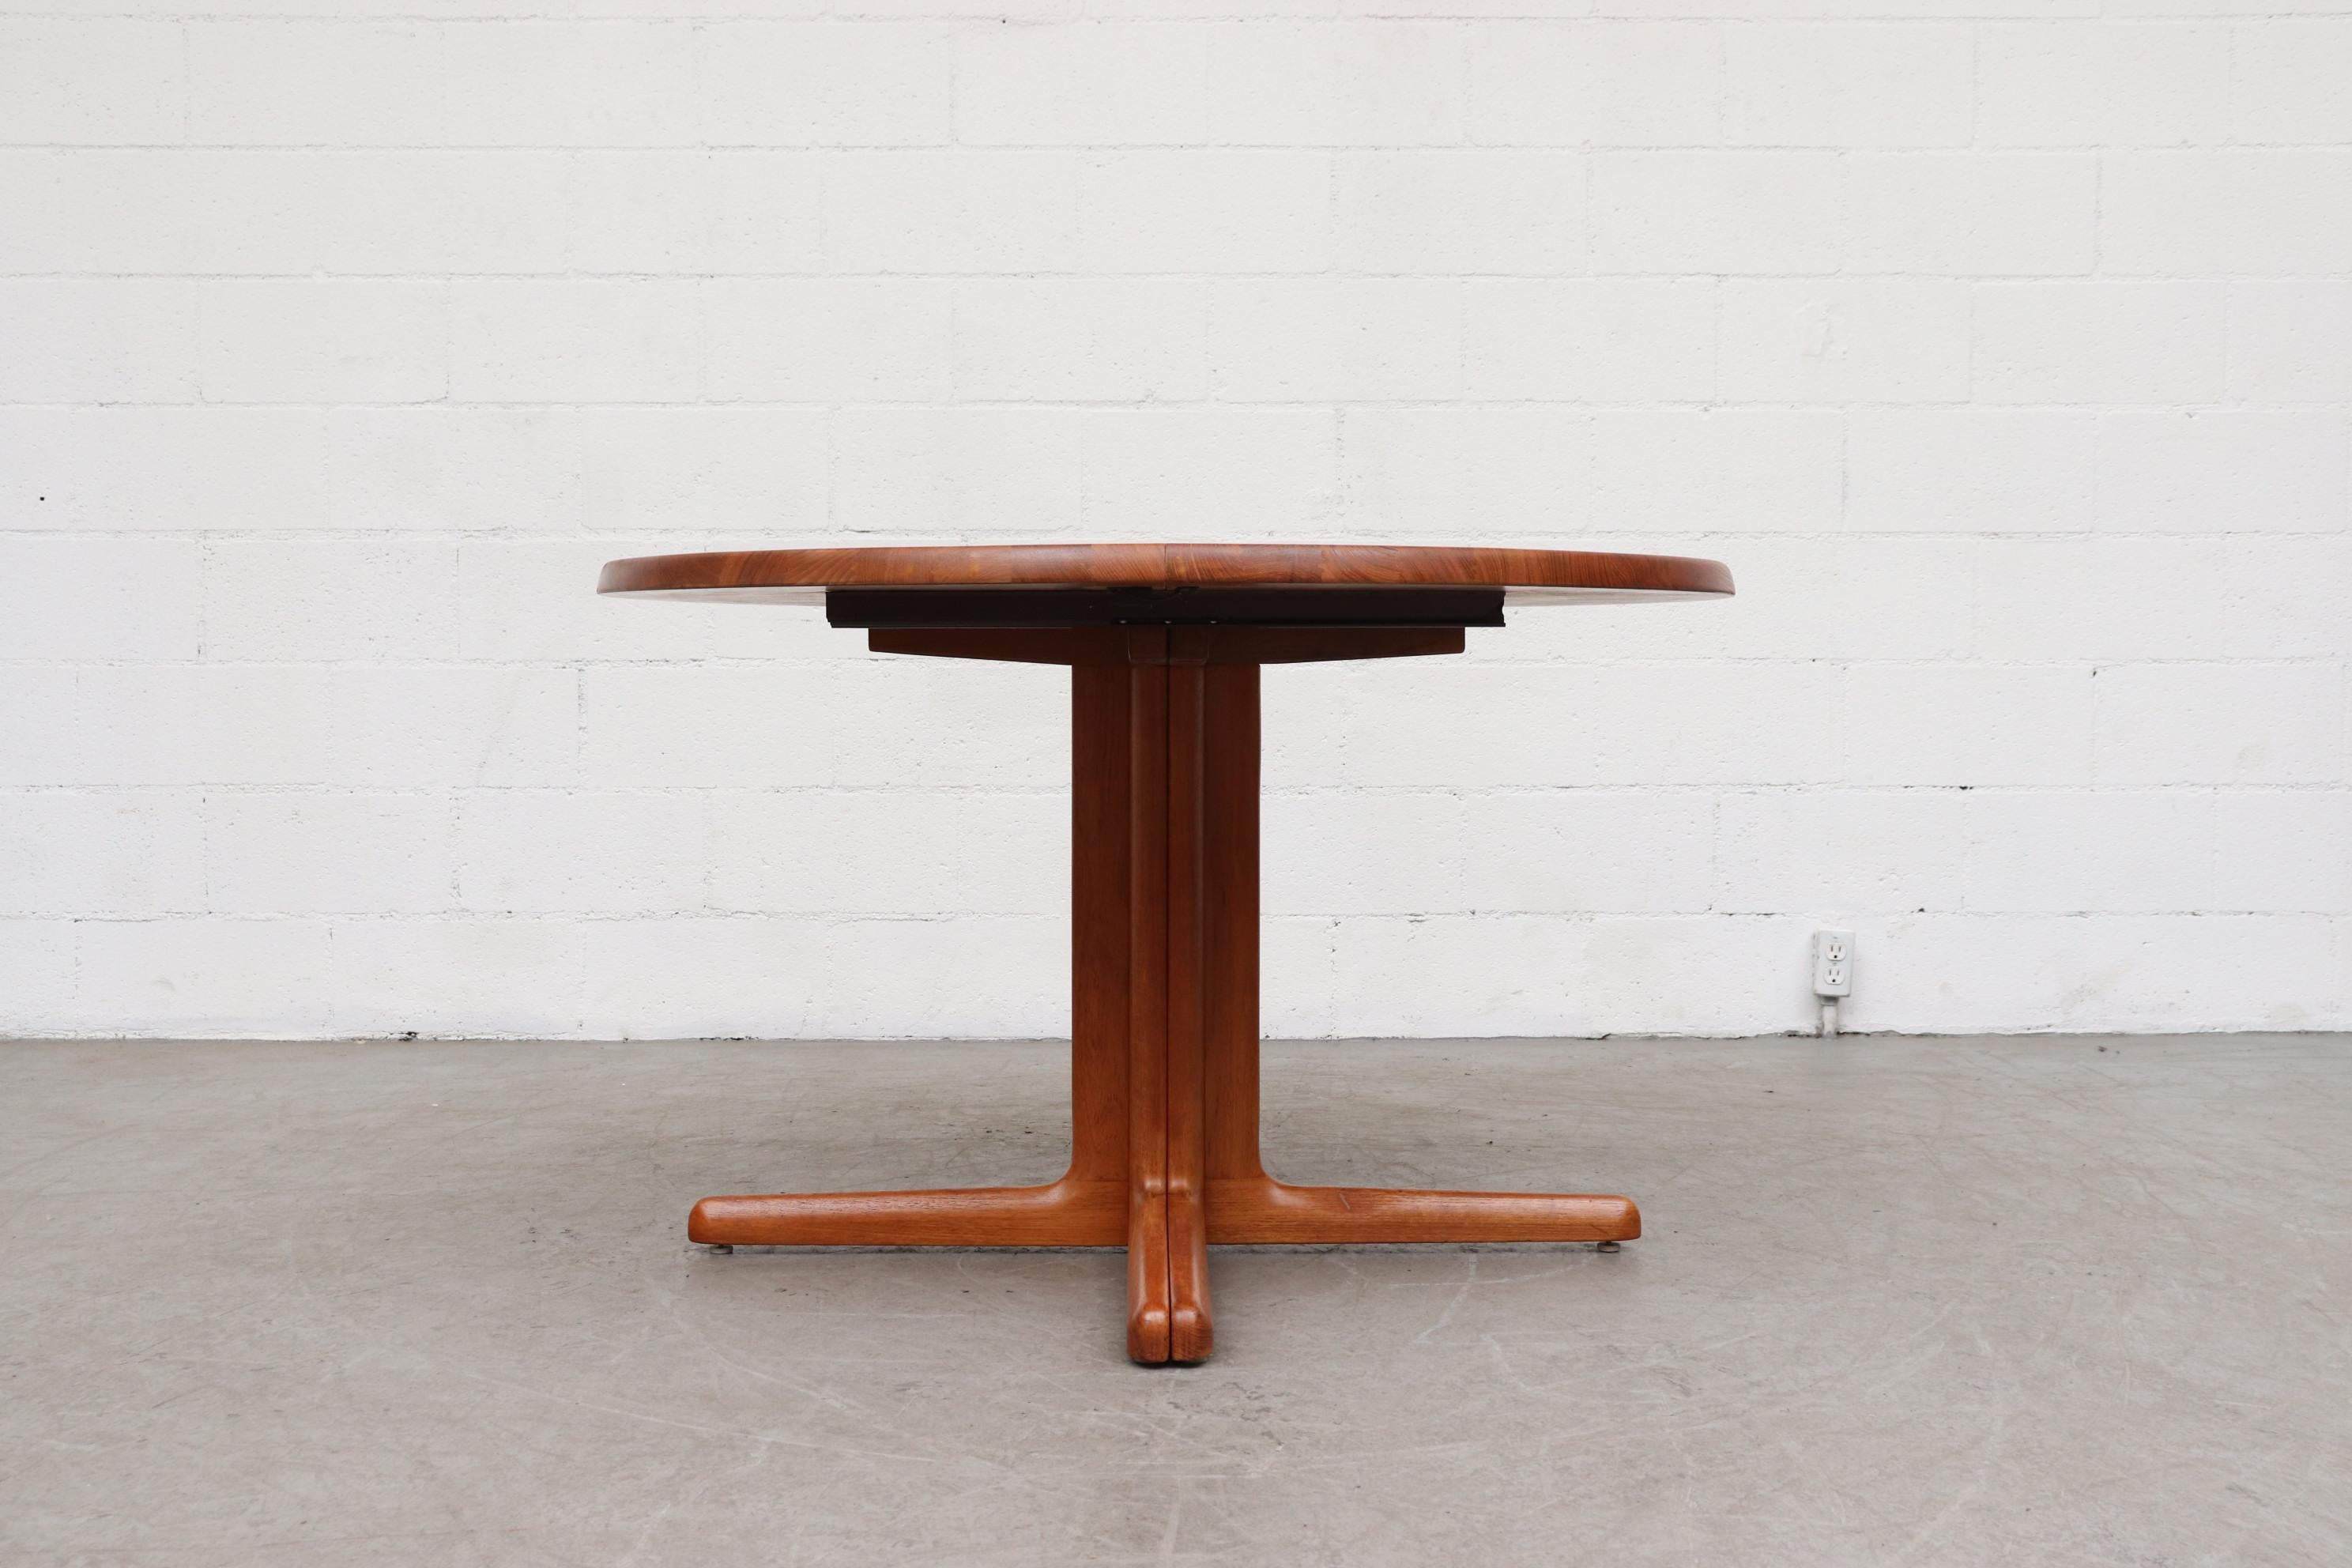 NiEls Moller for Gudme Mobelfabrik (attributed) solid teak Danish dining table round to oval dining table with 2 leaves. The leaves are hollow, but the round fixed top is solid. Pedestal base splits to 2 feet. Lightly refinished. In original